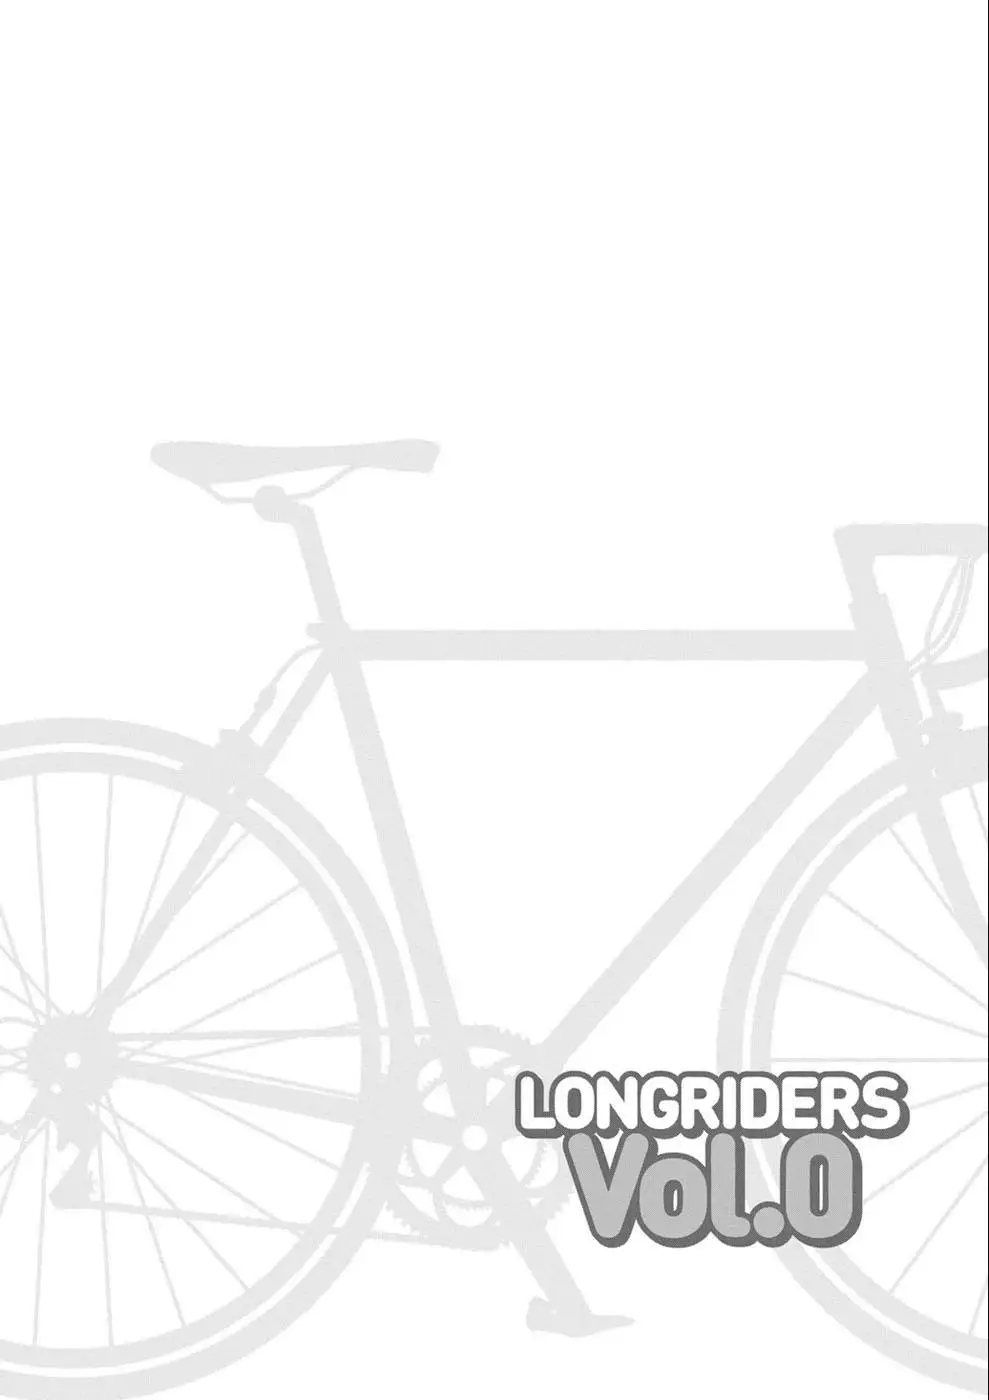 Long Riders! - 22.1 page 7-7307f105